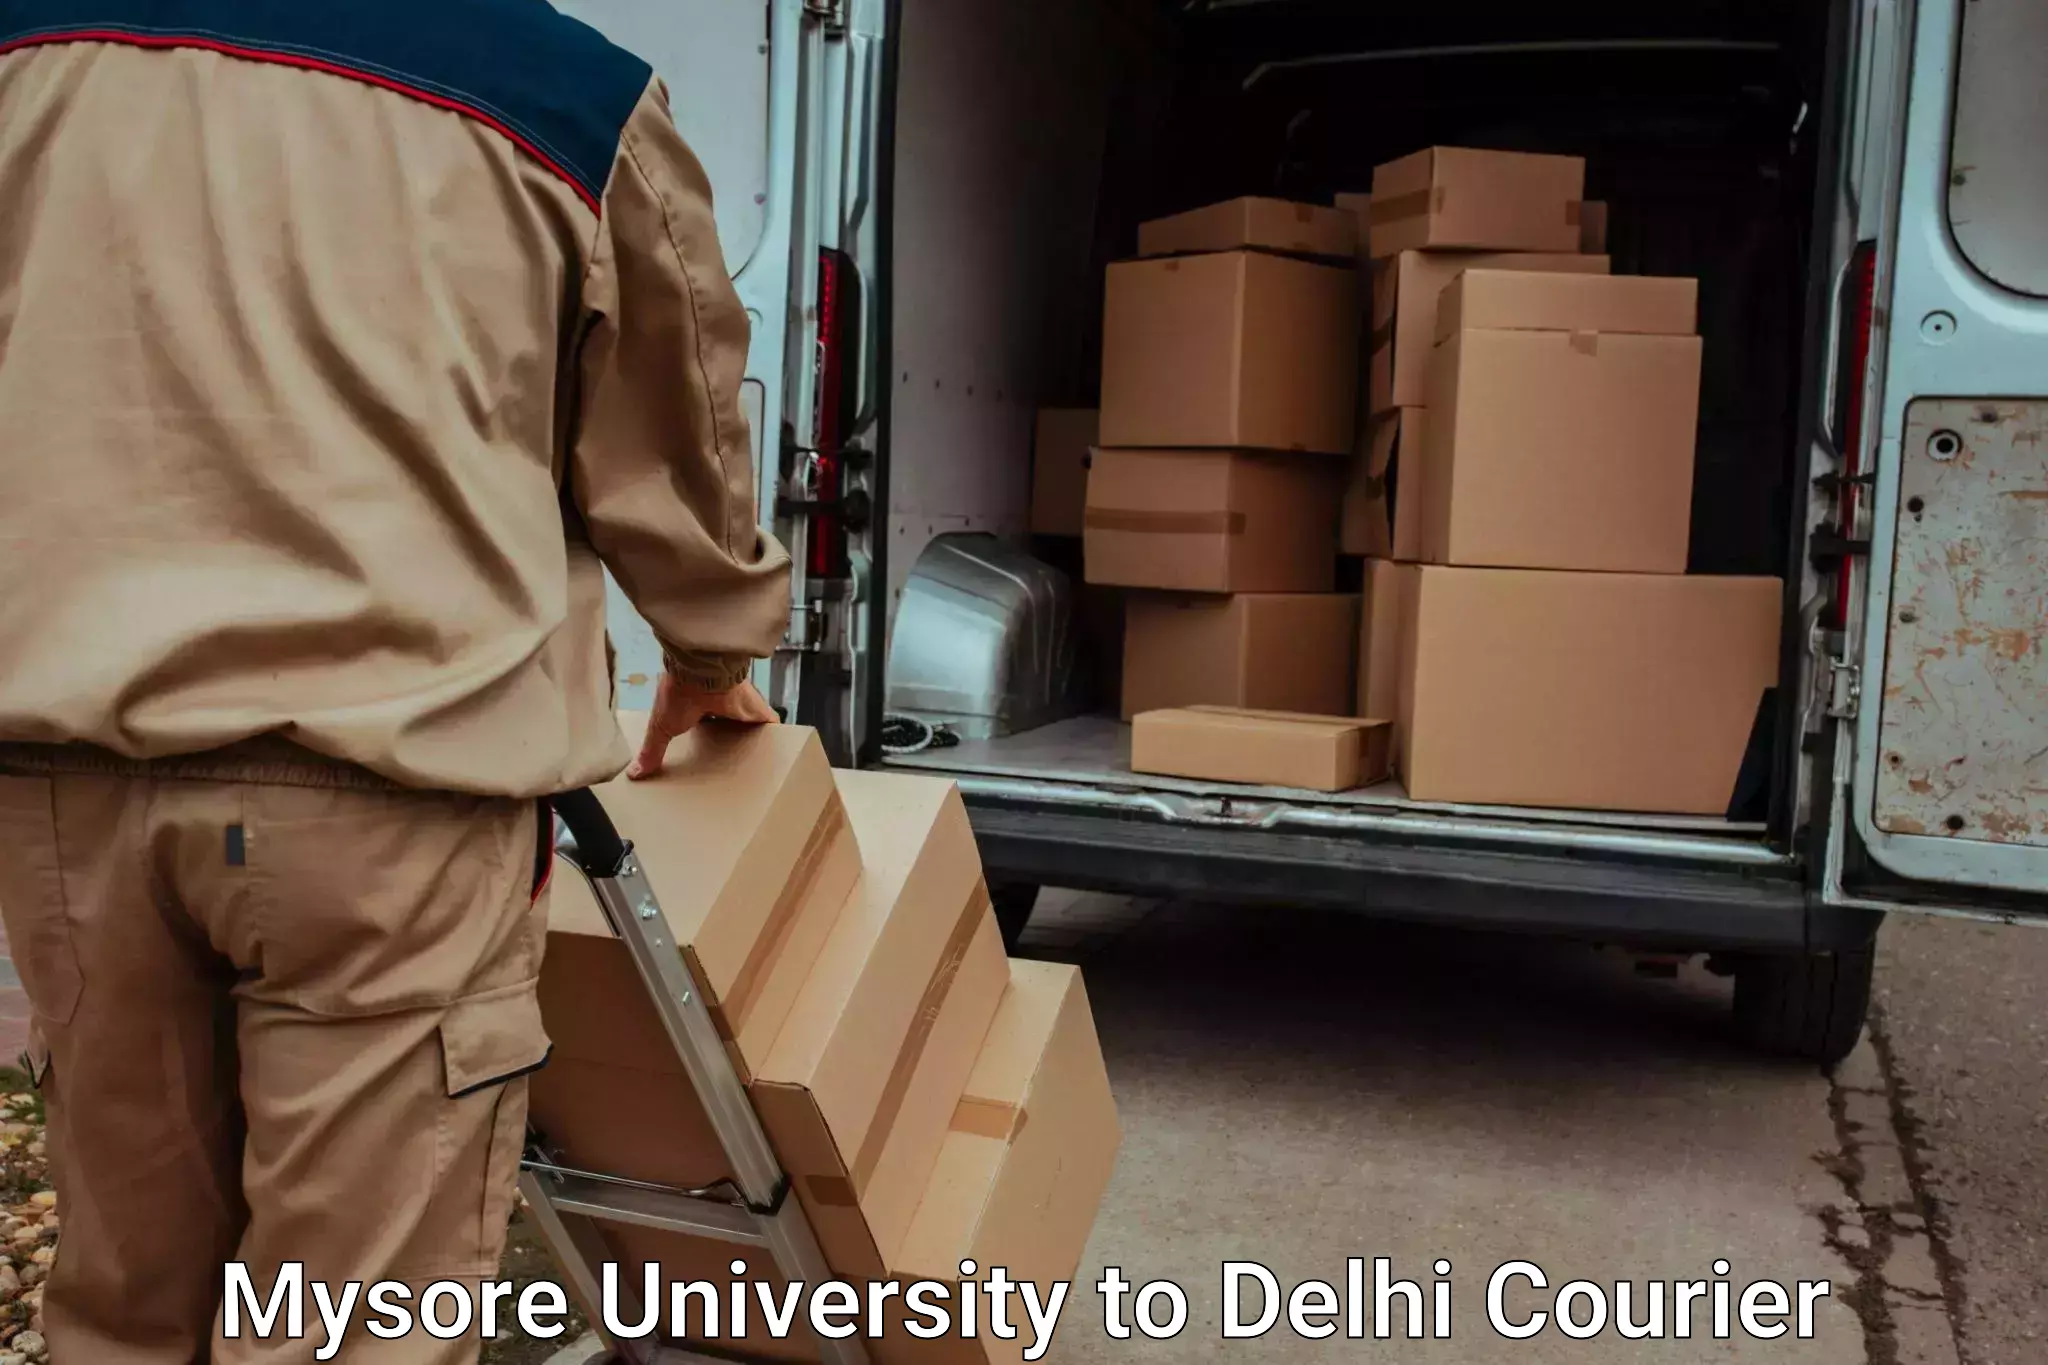 Full-service movers in Mysore University to Lodhi Road